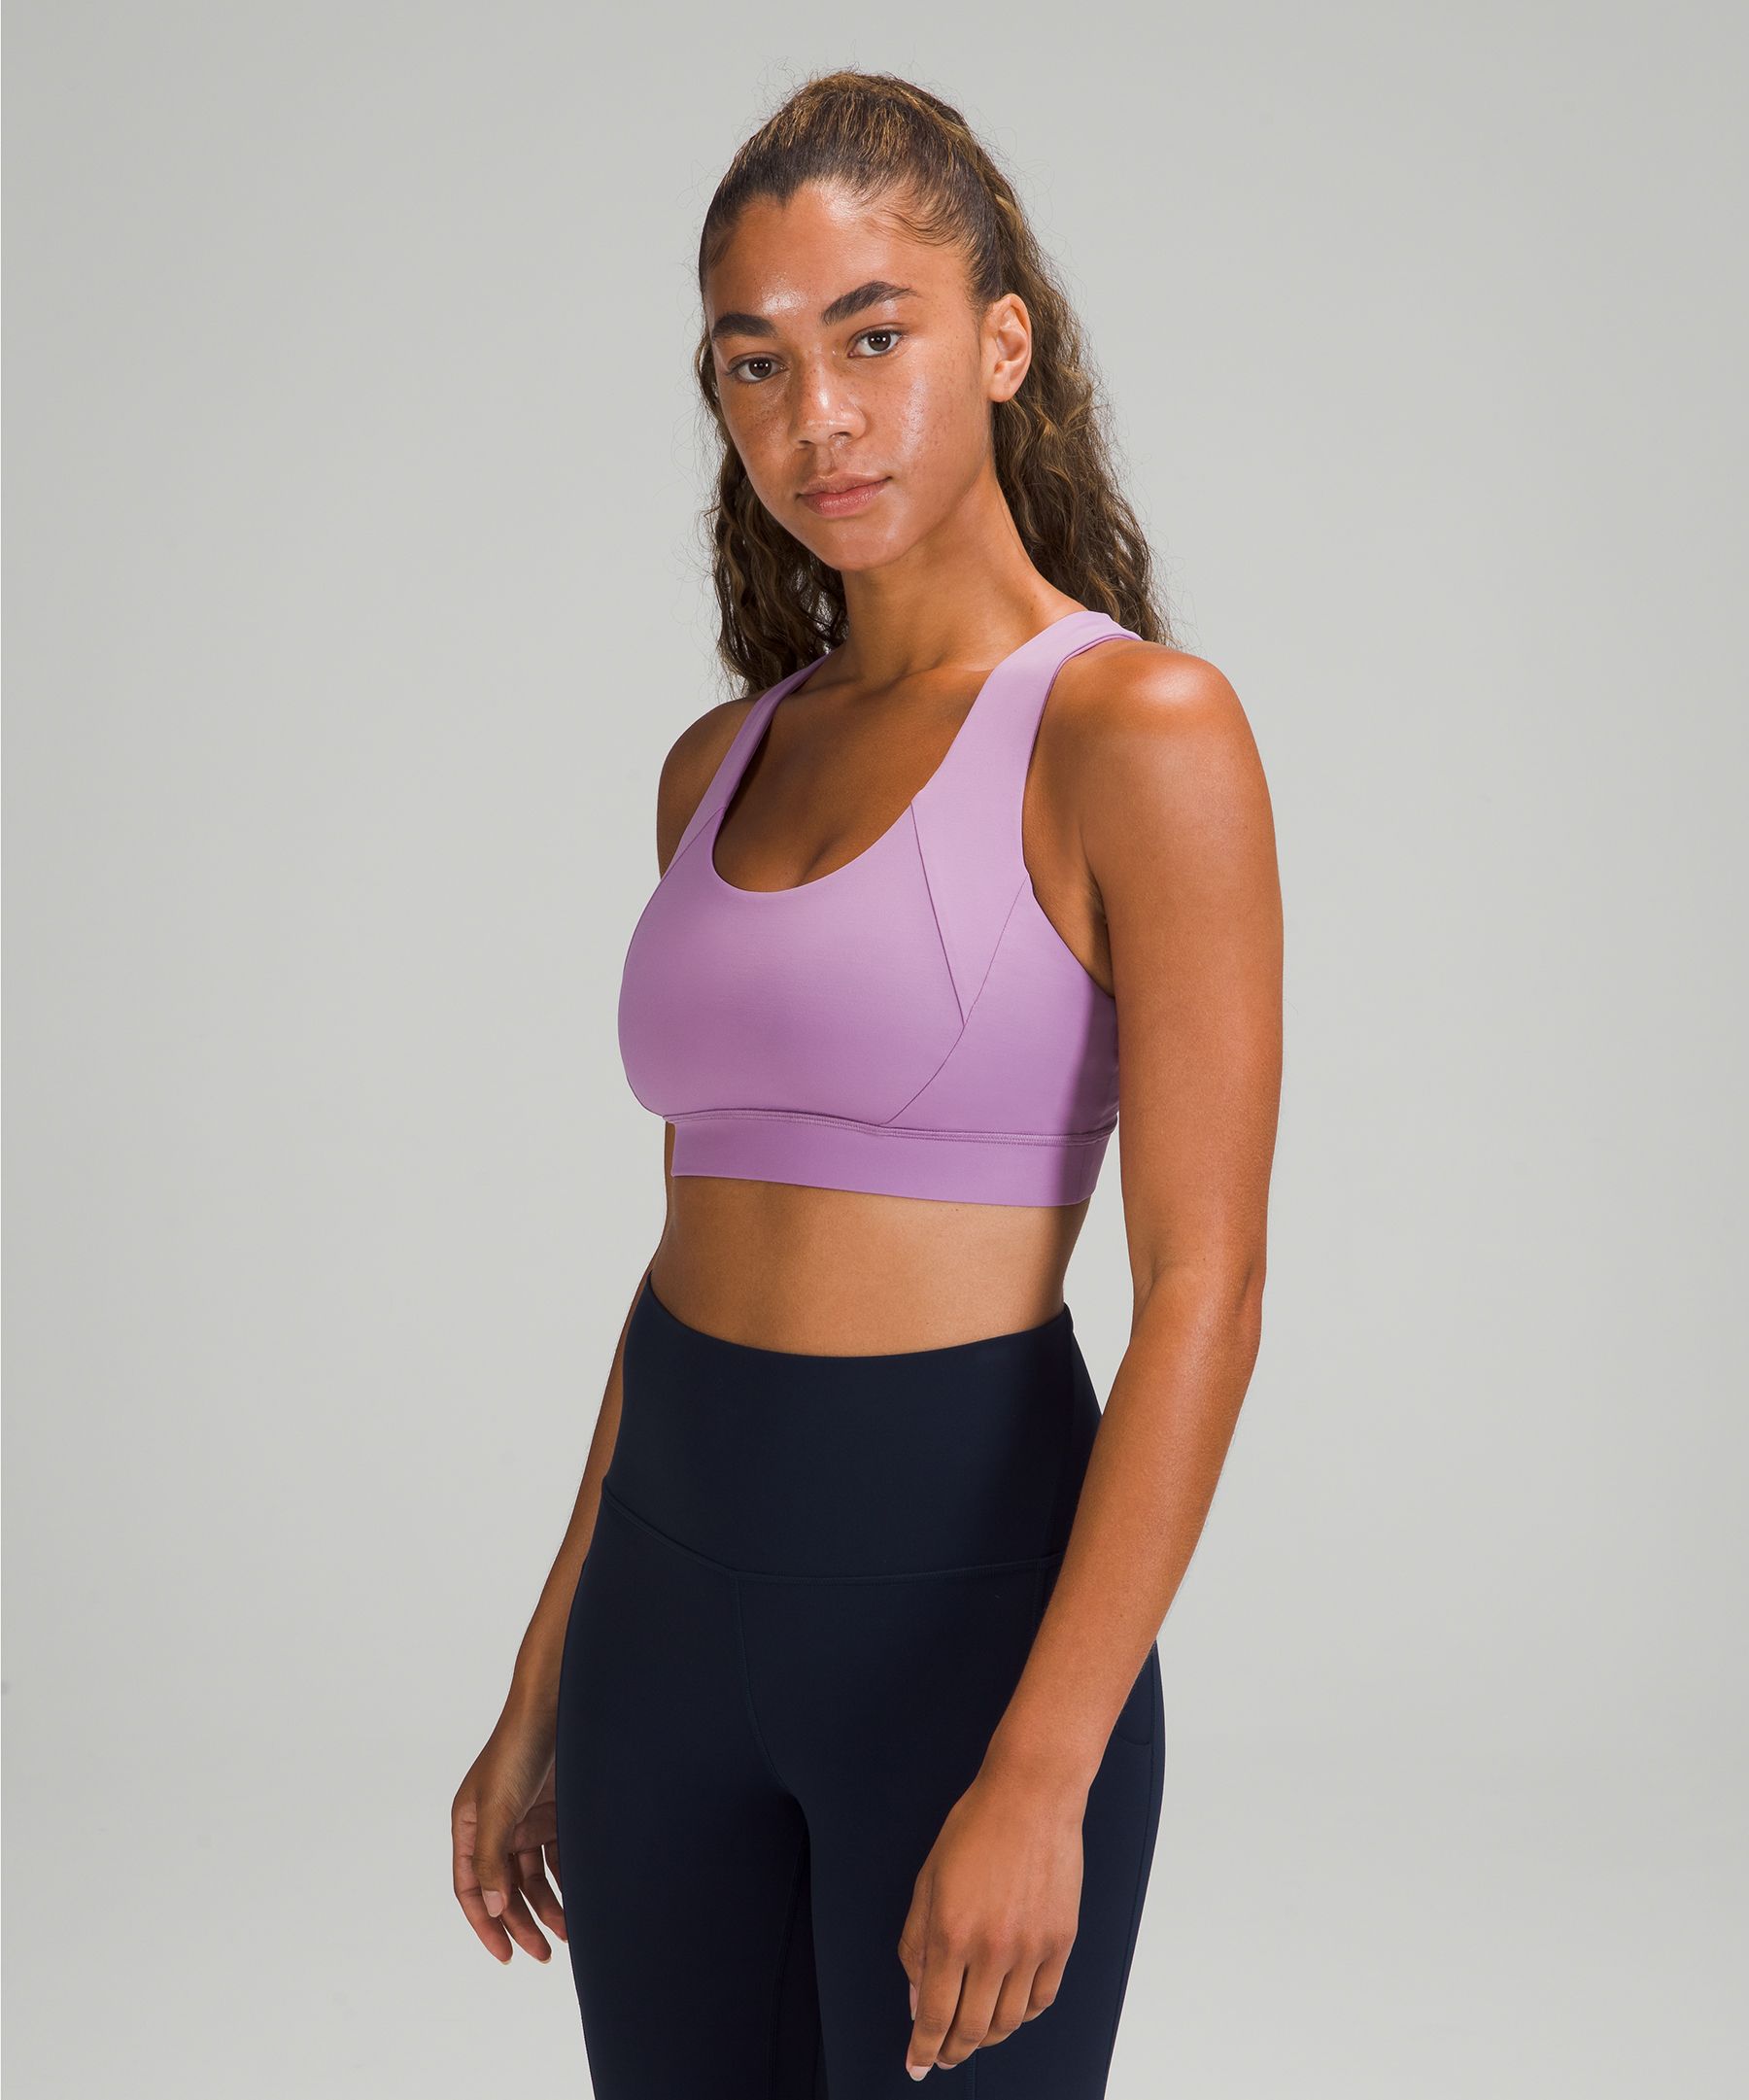 Lululemon Free To Be Elevated Bra Light Support, Dd/ddd(e) Cup In Wisteria Purple